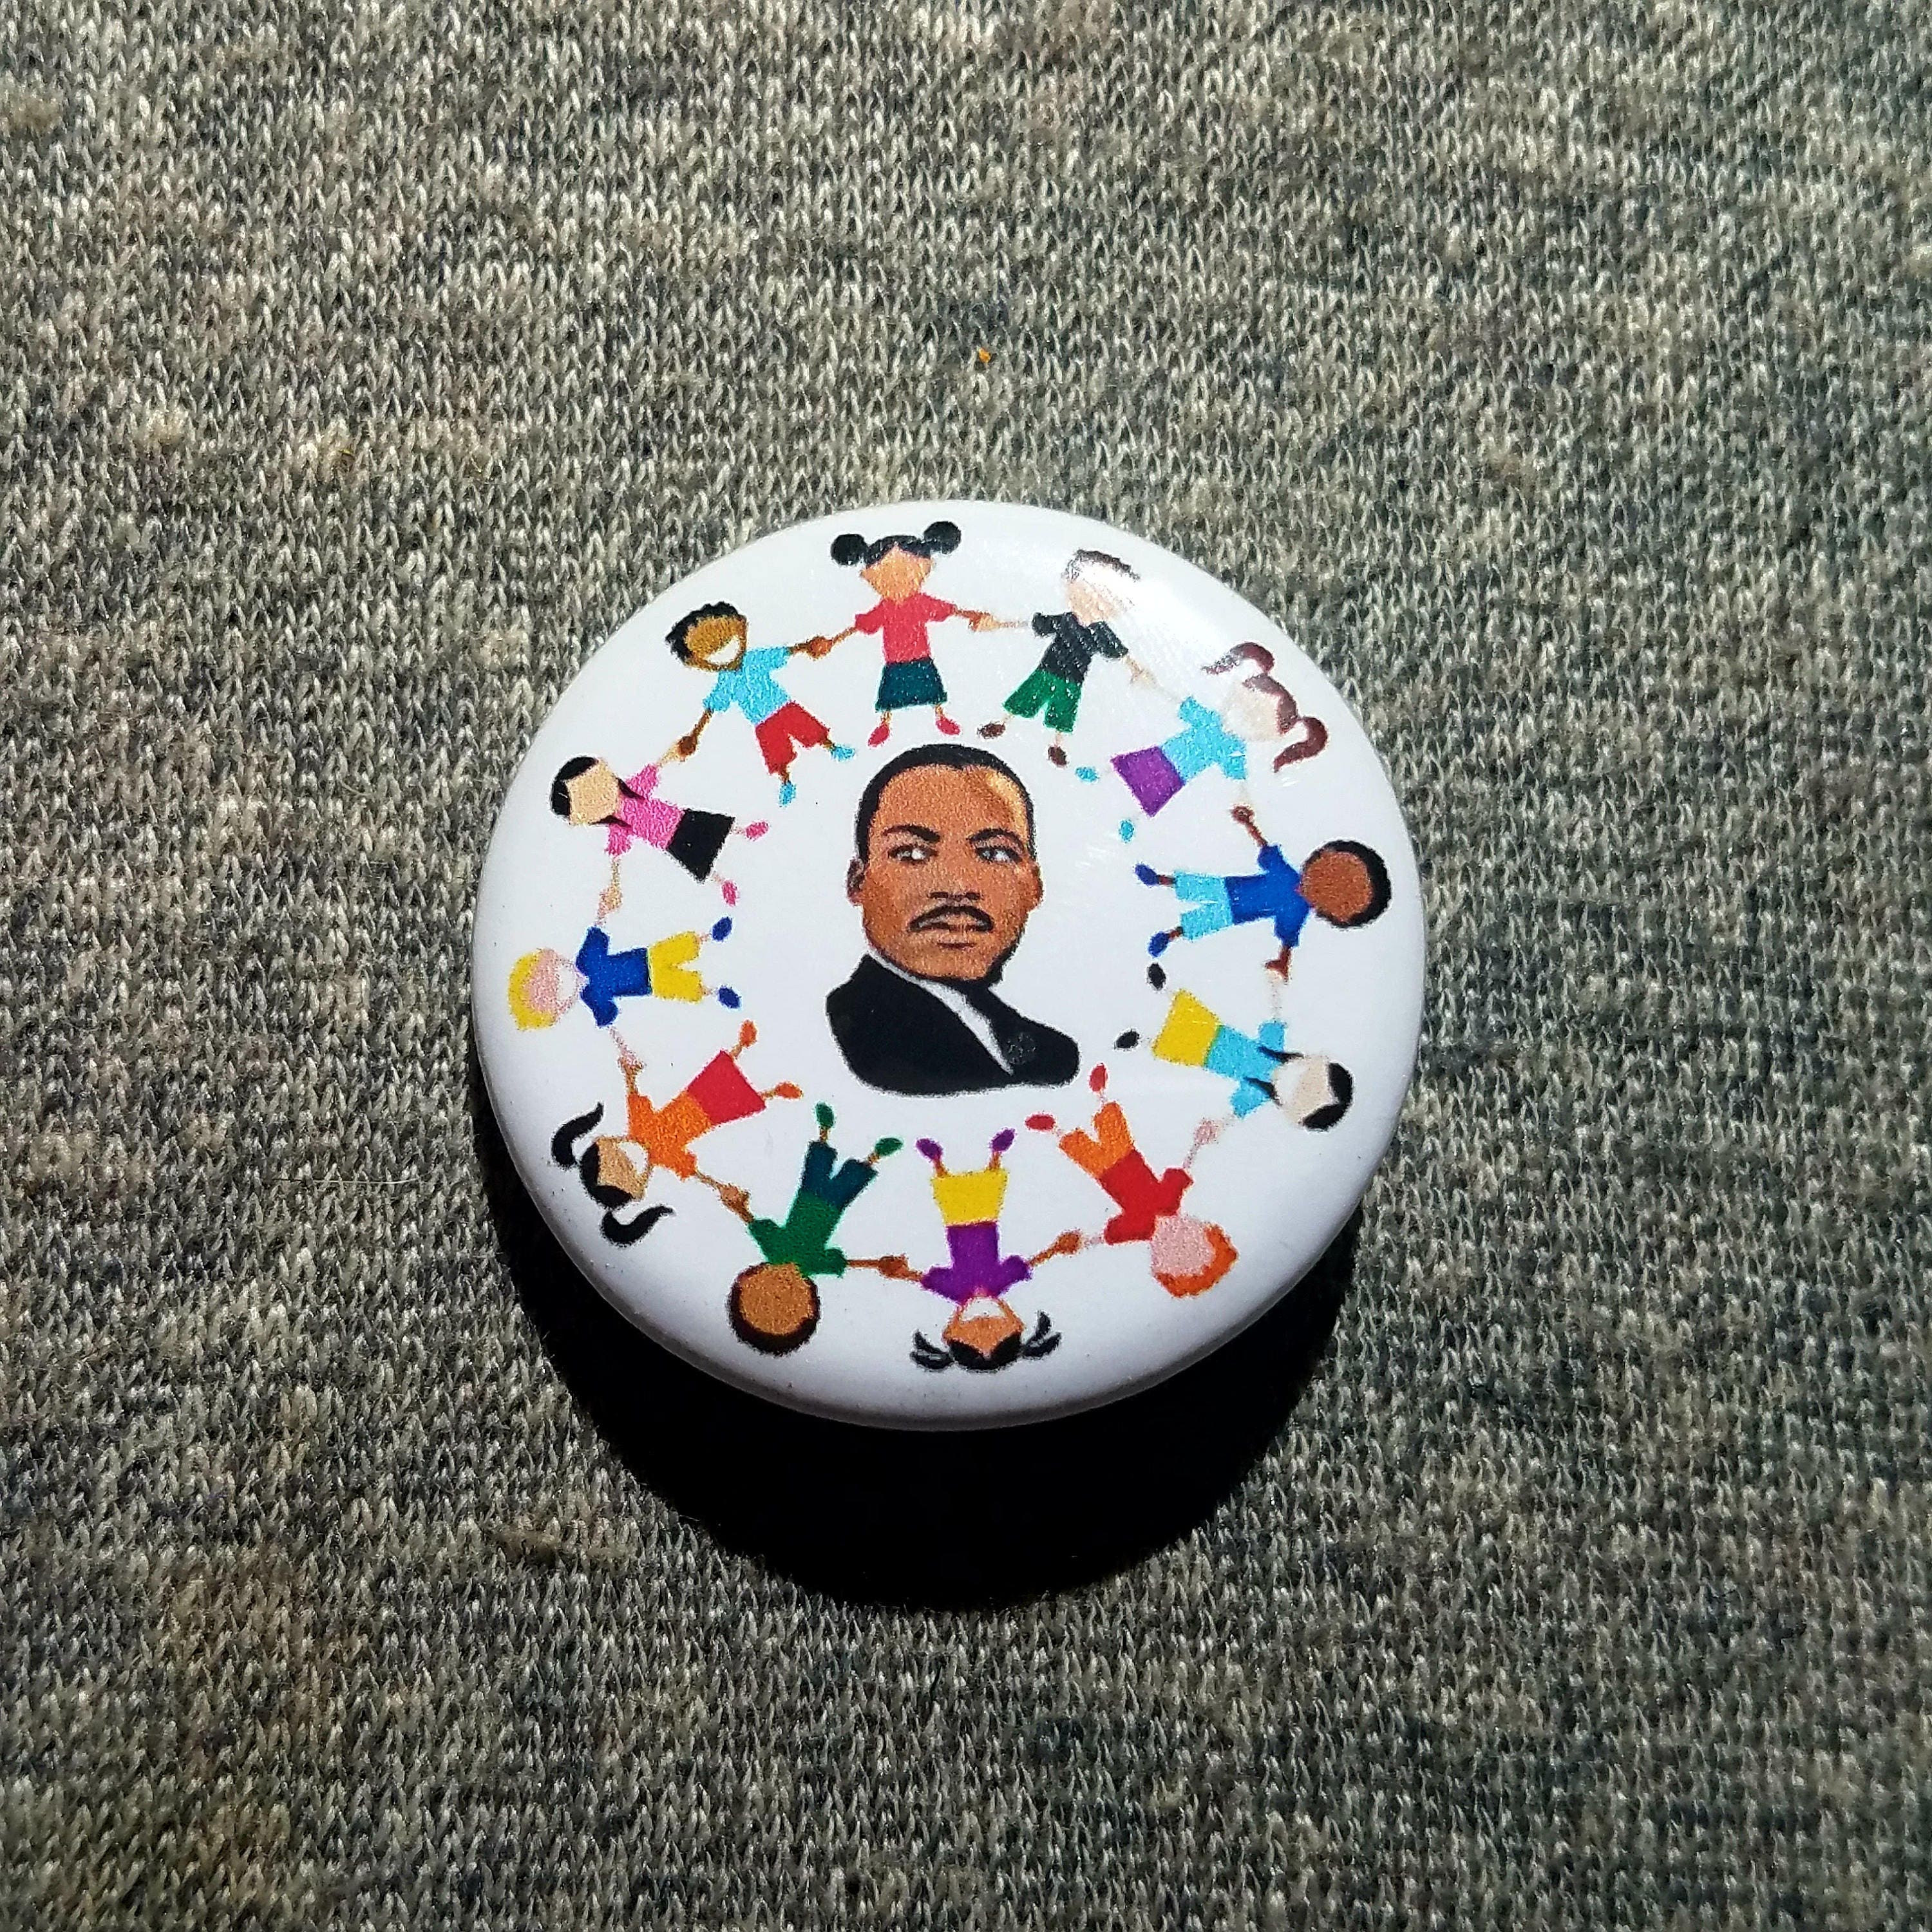 Lot of 5-1.25" Vintage Style Button Martin Luther King Jr 1.25" button set 